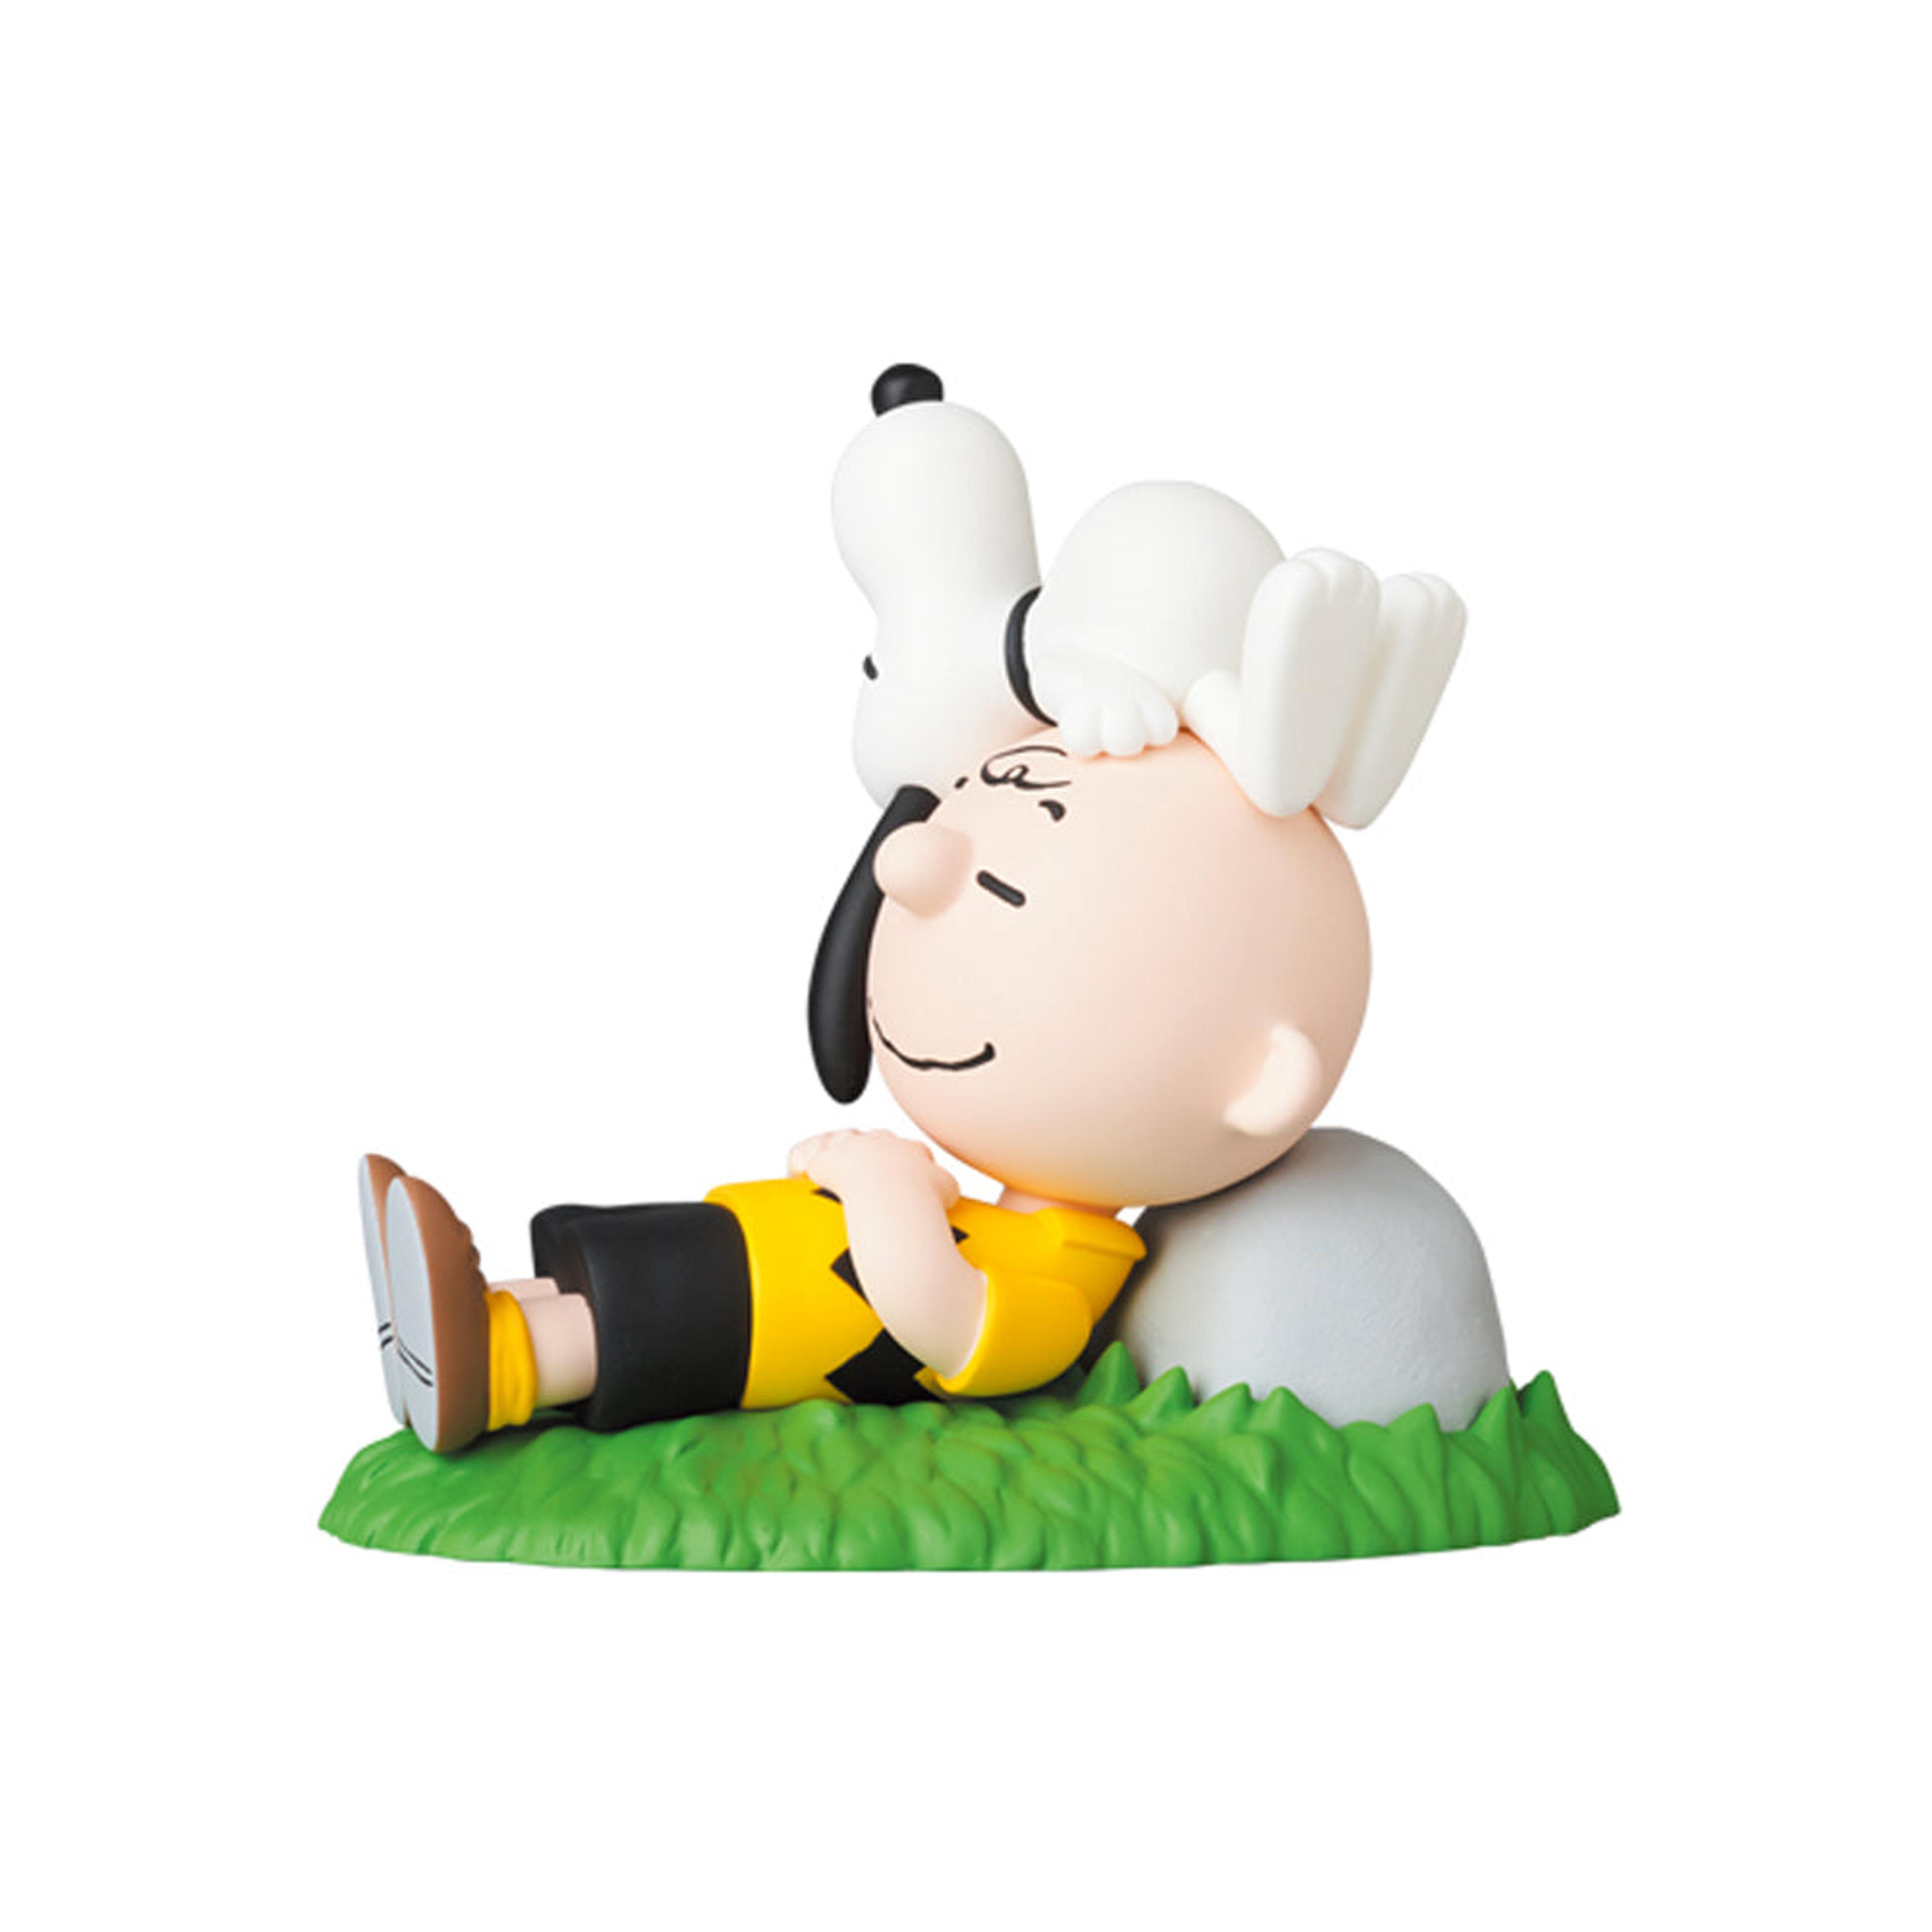 Alternate View 1 of UDF Peanuts Series 13: Napping Charlie Brown & Snoopy Ultra Deta